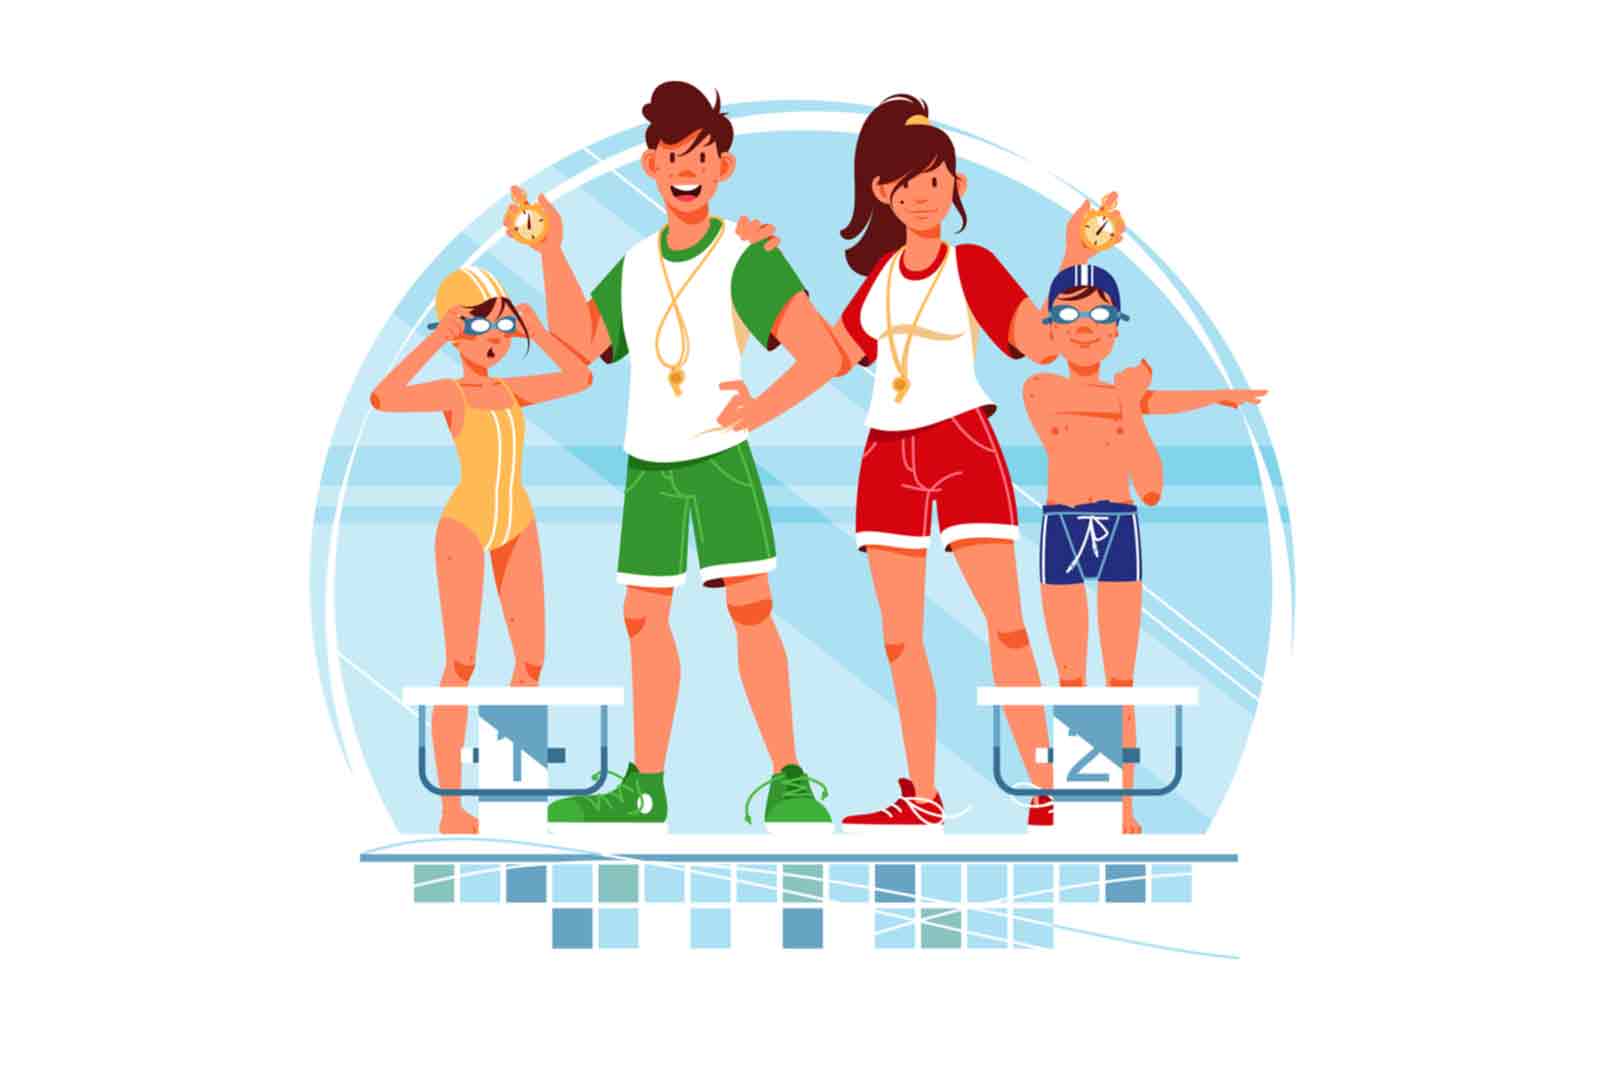 Coaches and swimmers vector illustration.